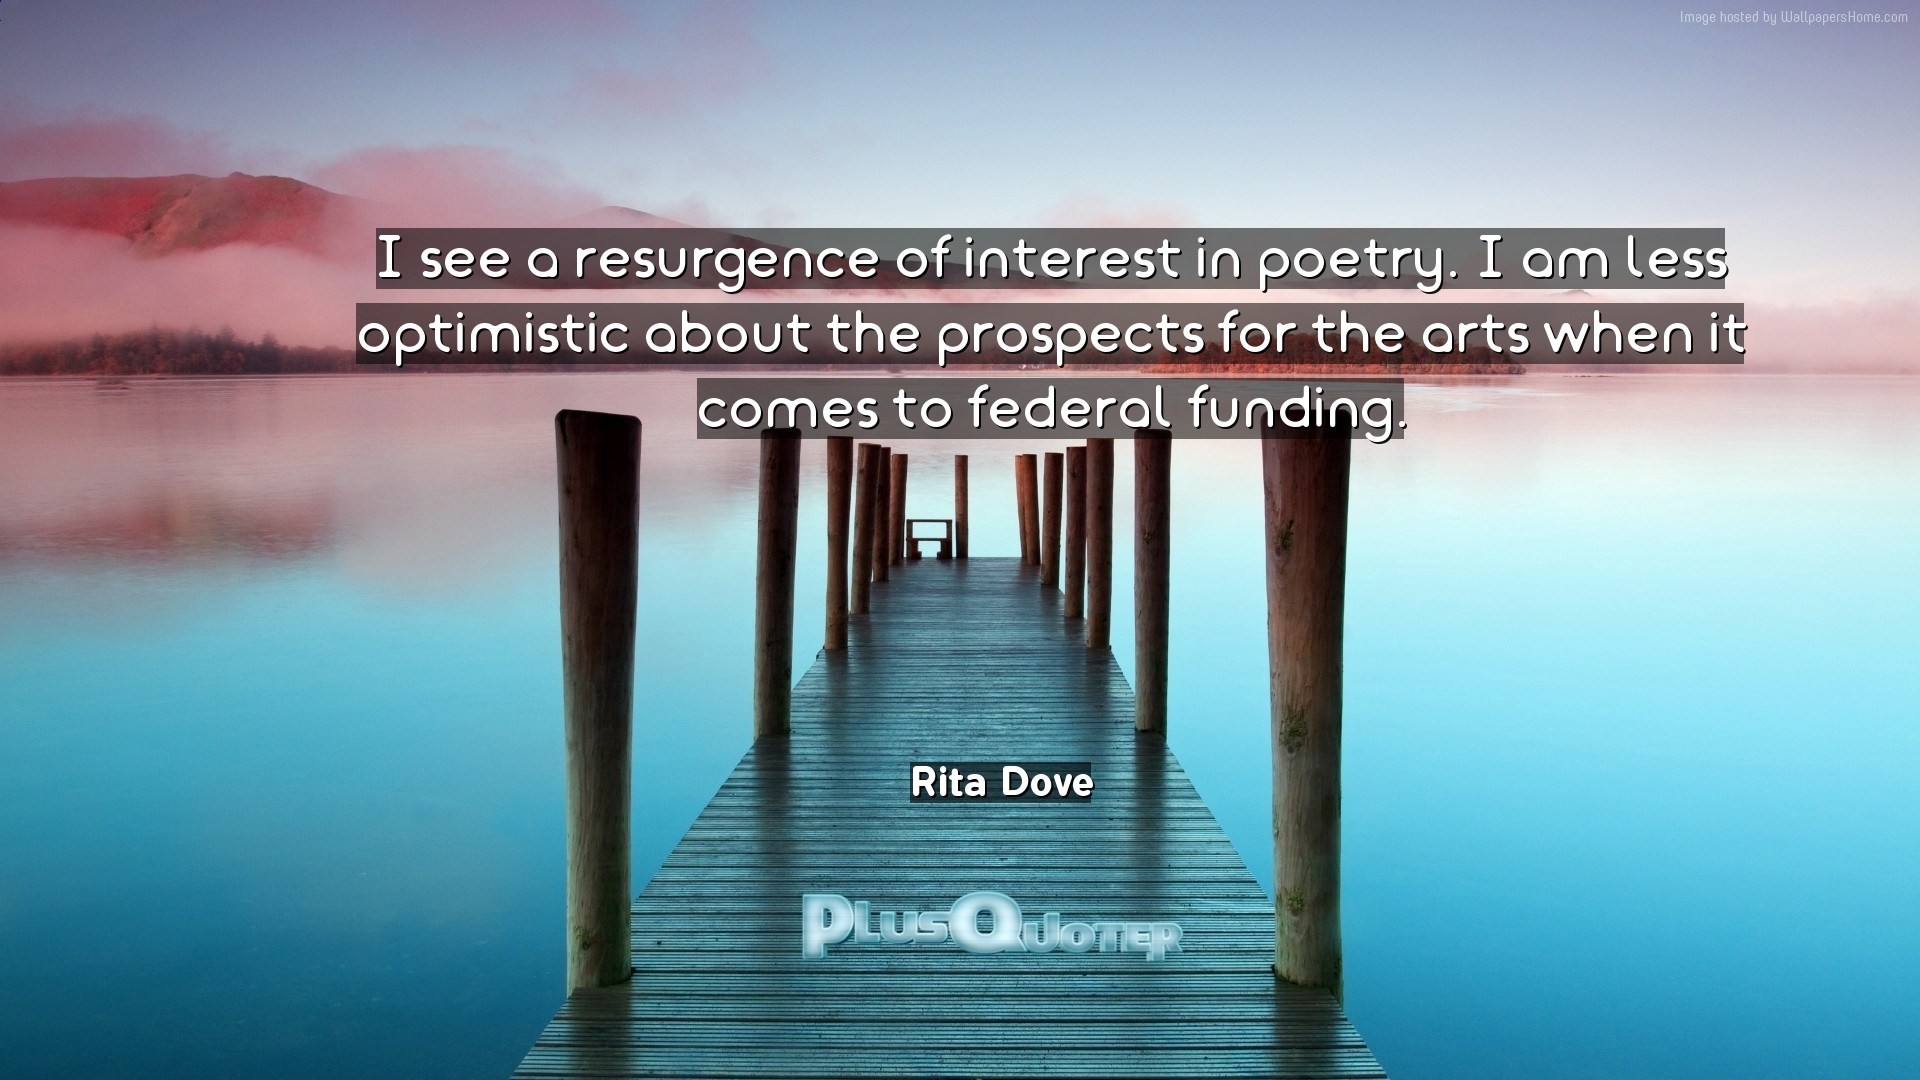 1920x1080 Download Wallpaper with inspirational Quotes- "I see a resurgence of  interest in poetry.